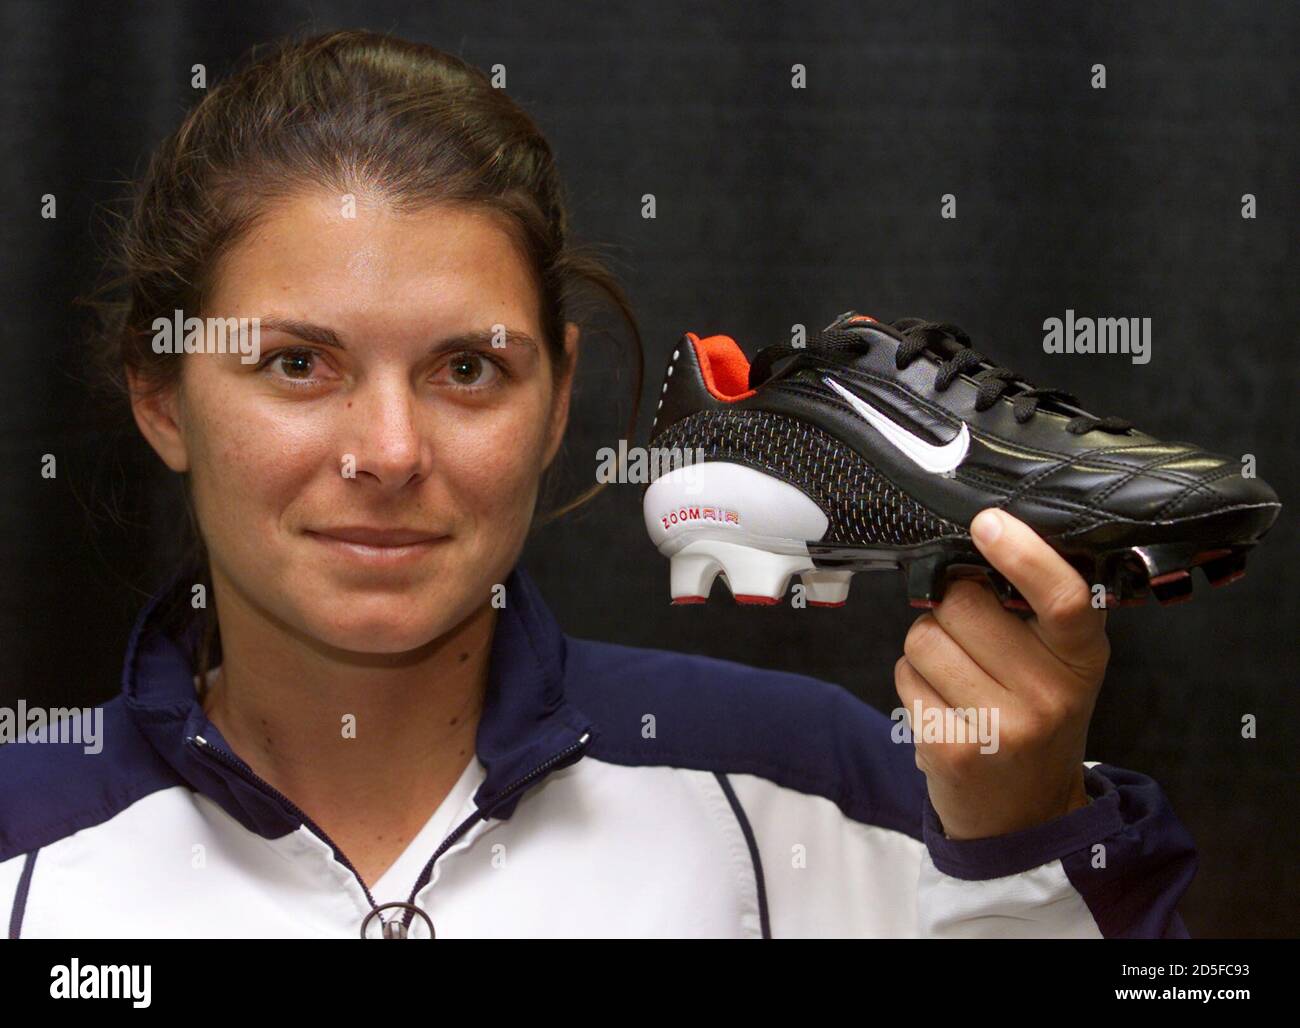 United States womens' soccer star Mia Hamm shows off her new shoe during  its unveiling in the Mia Hamm building at Nike's World headquarters in  Beaverton, Oregon, May 4. The shoe, called